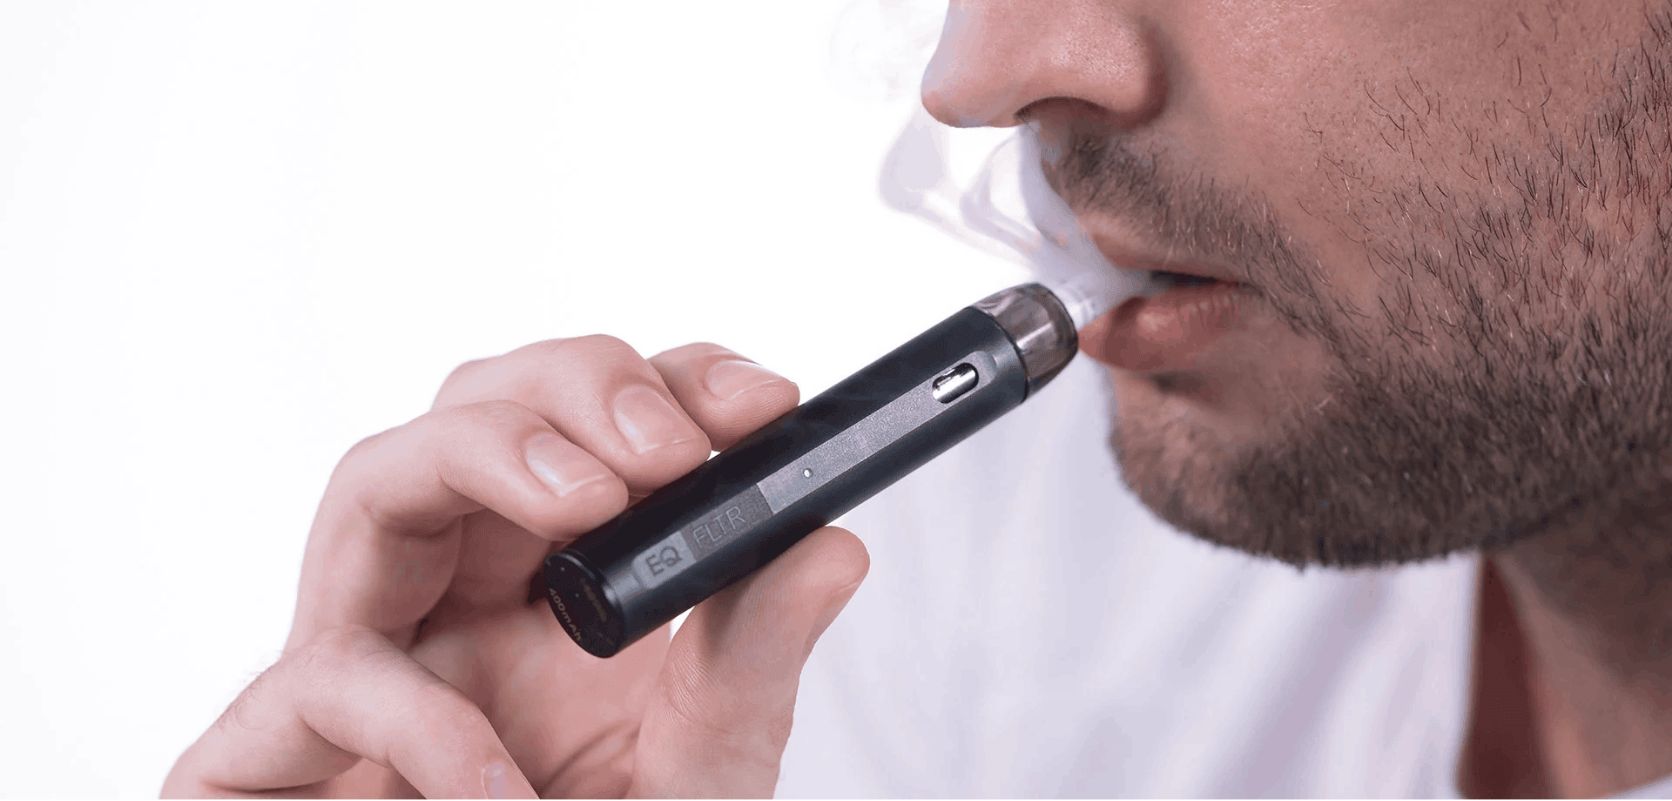 Push-button vape pens function by having the user press a button to turn on the heating component and create vapour.